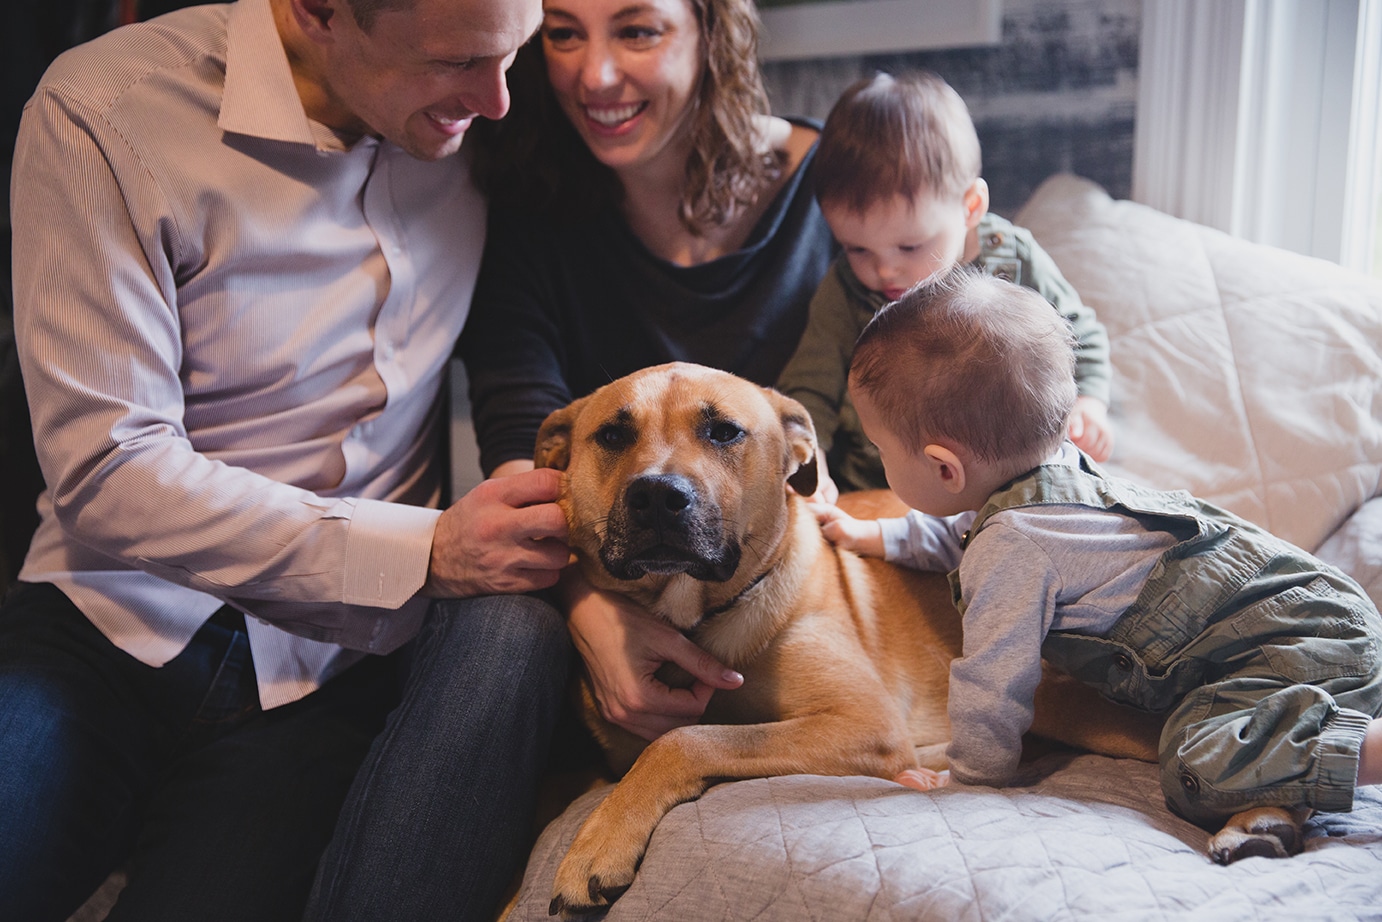 A documentary photograph of a twin baby boys petting their dog during an in home family session in Boston, Massachusetts